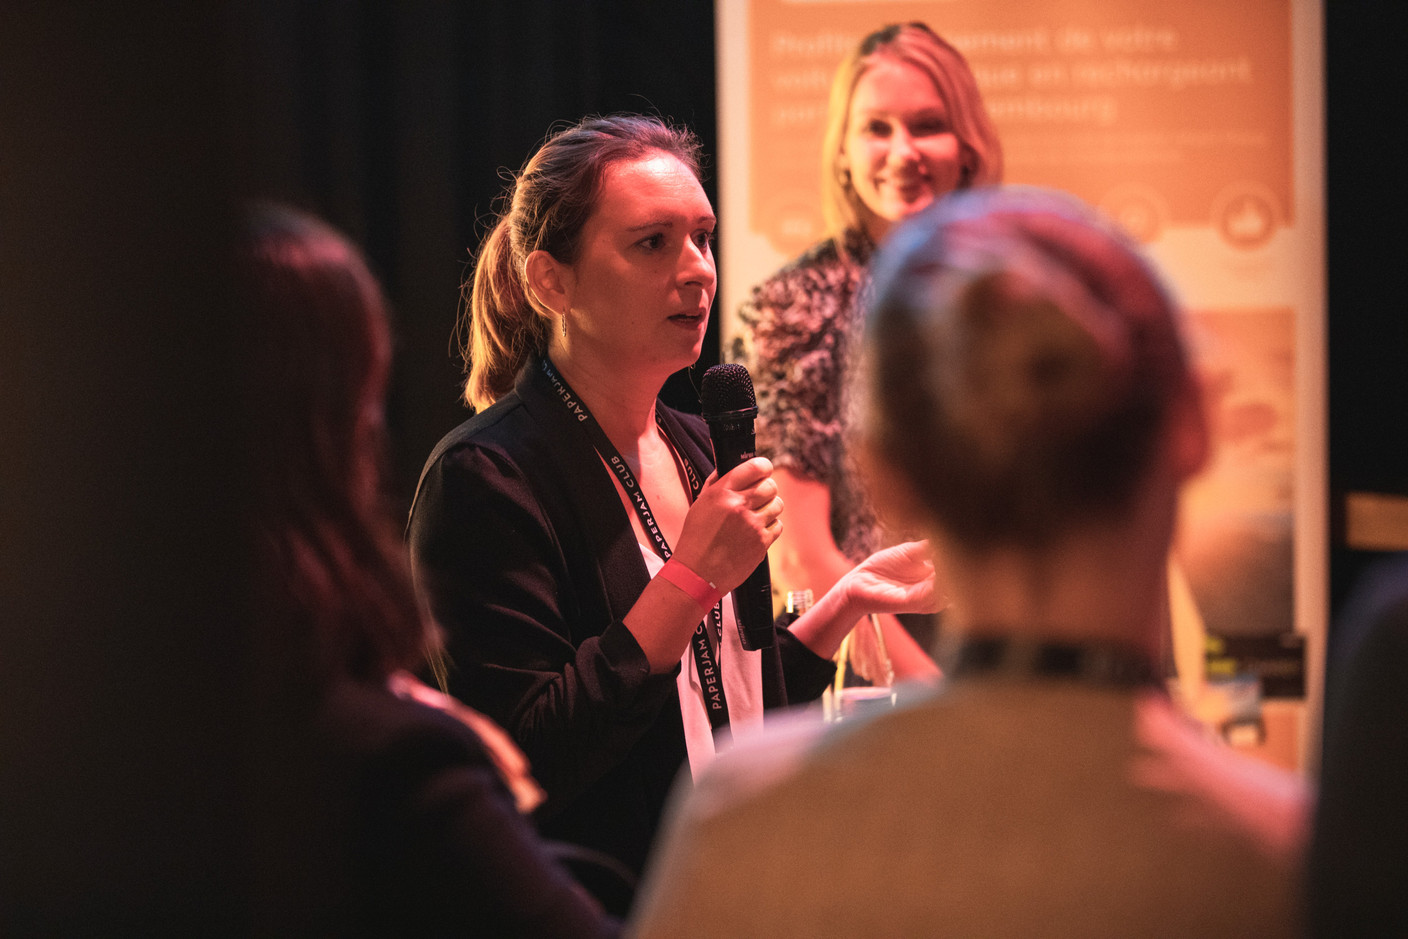 Nele Segers, HR business partner at IQ-EQ, is seen speaking on the “Delano Live: How to move up without burning out?” panel, 16 November 2021. Photo: Simon Verjus/Maison Moderne